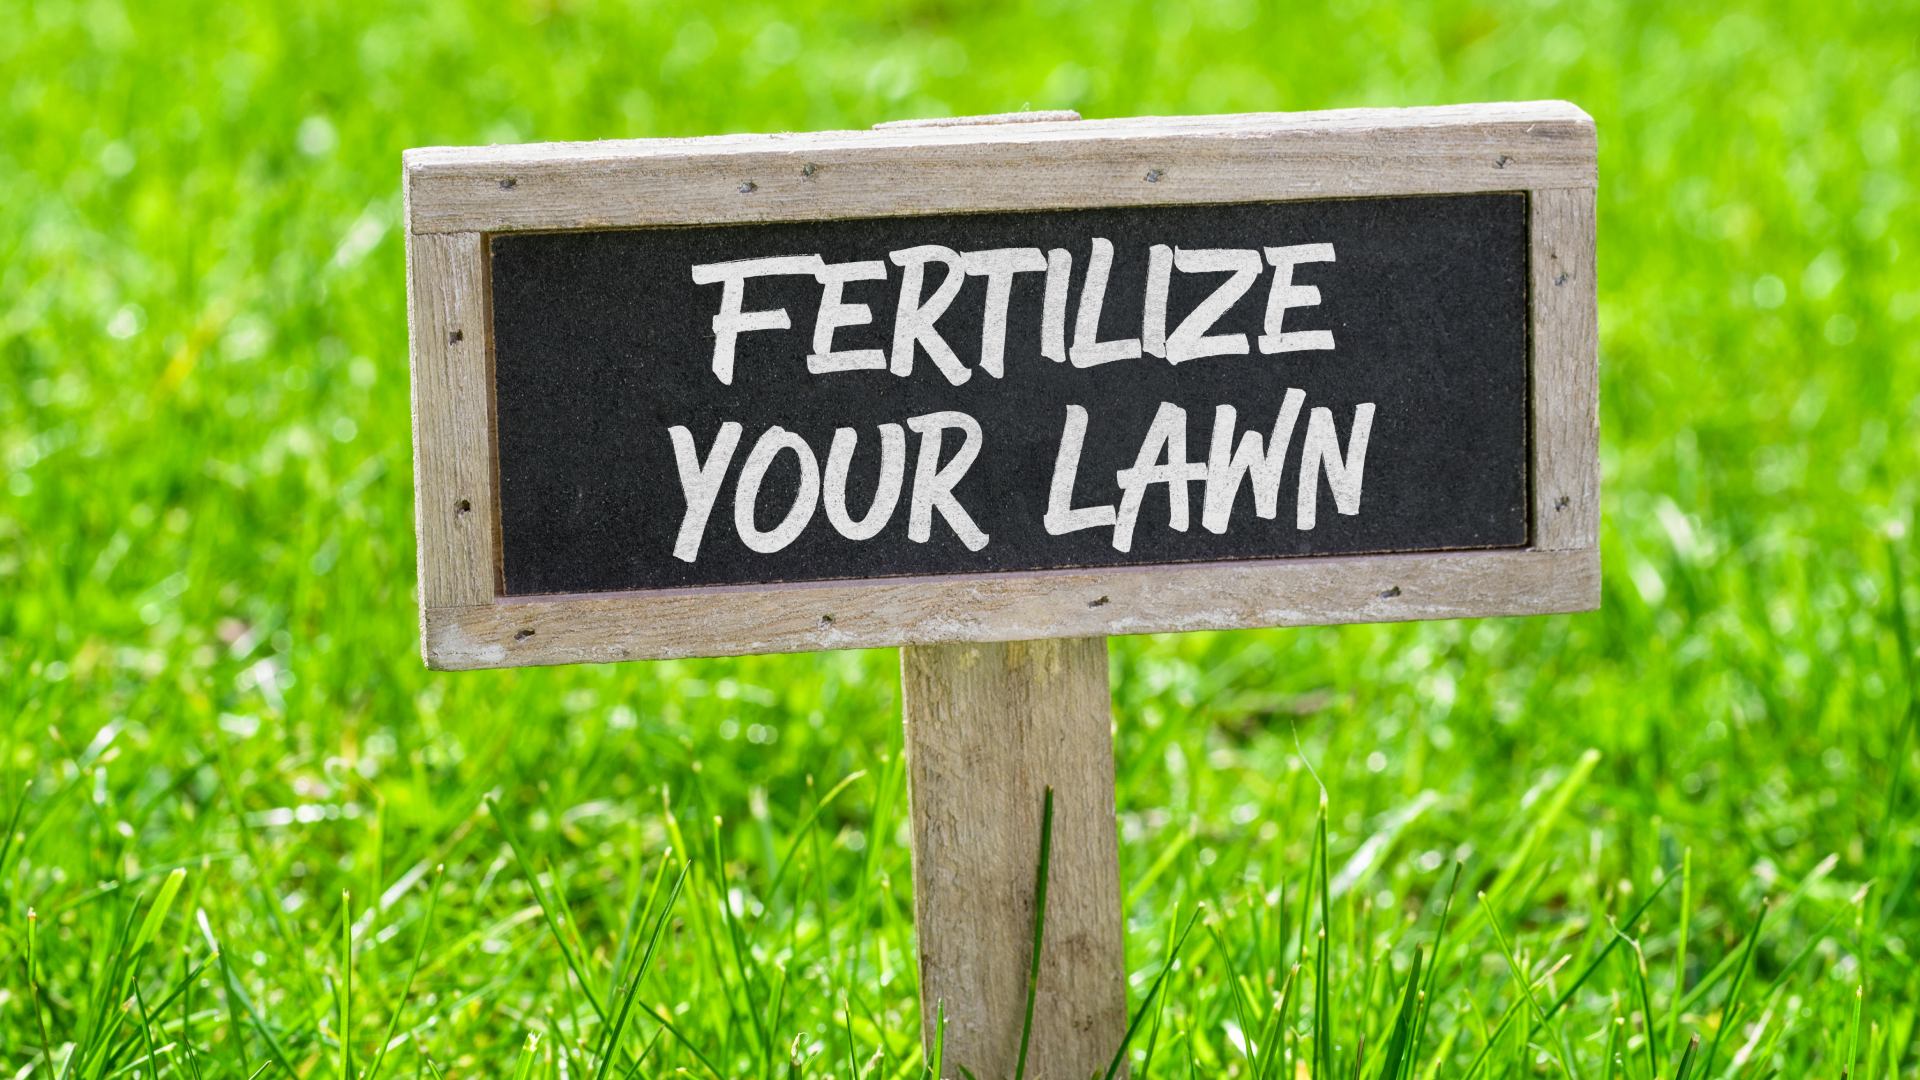 How Often Should You Be Fertilizing Your Lawn in the Texas Summer Heat?